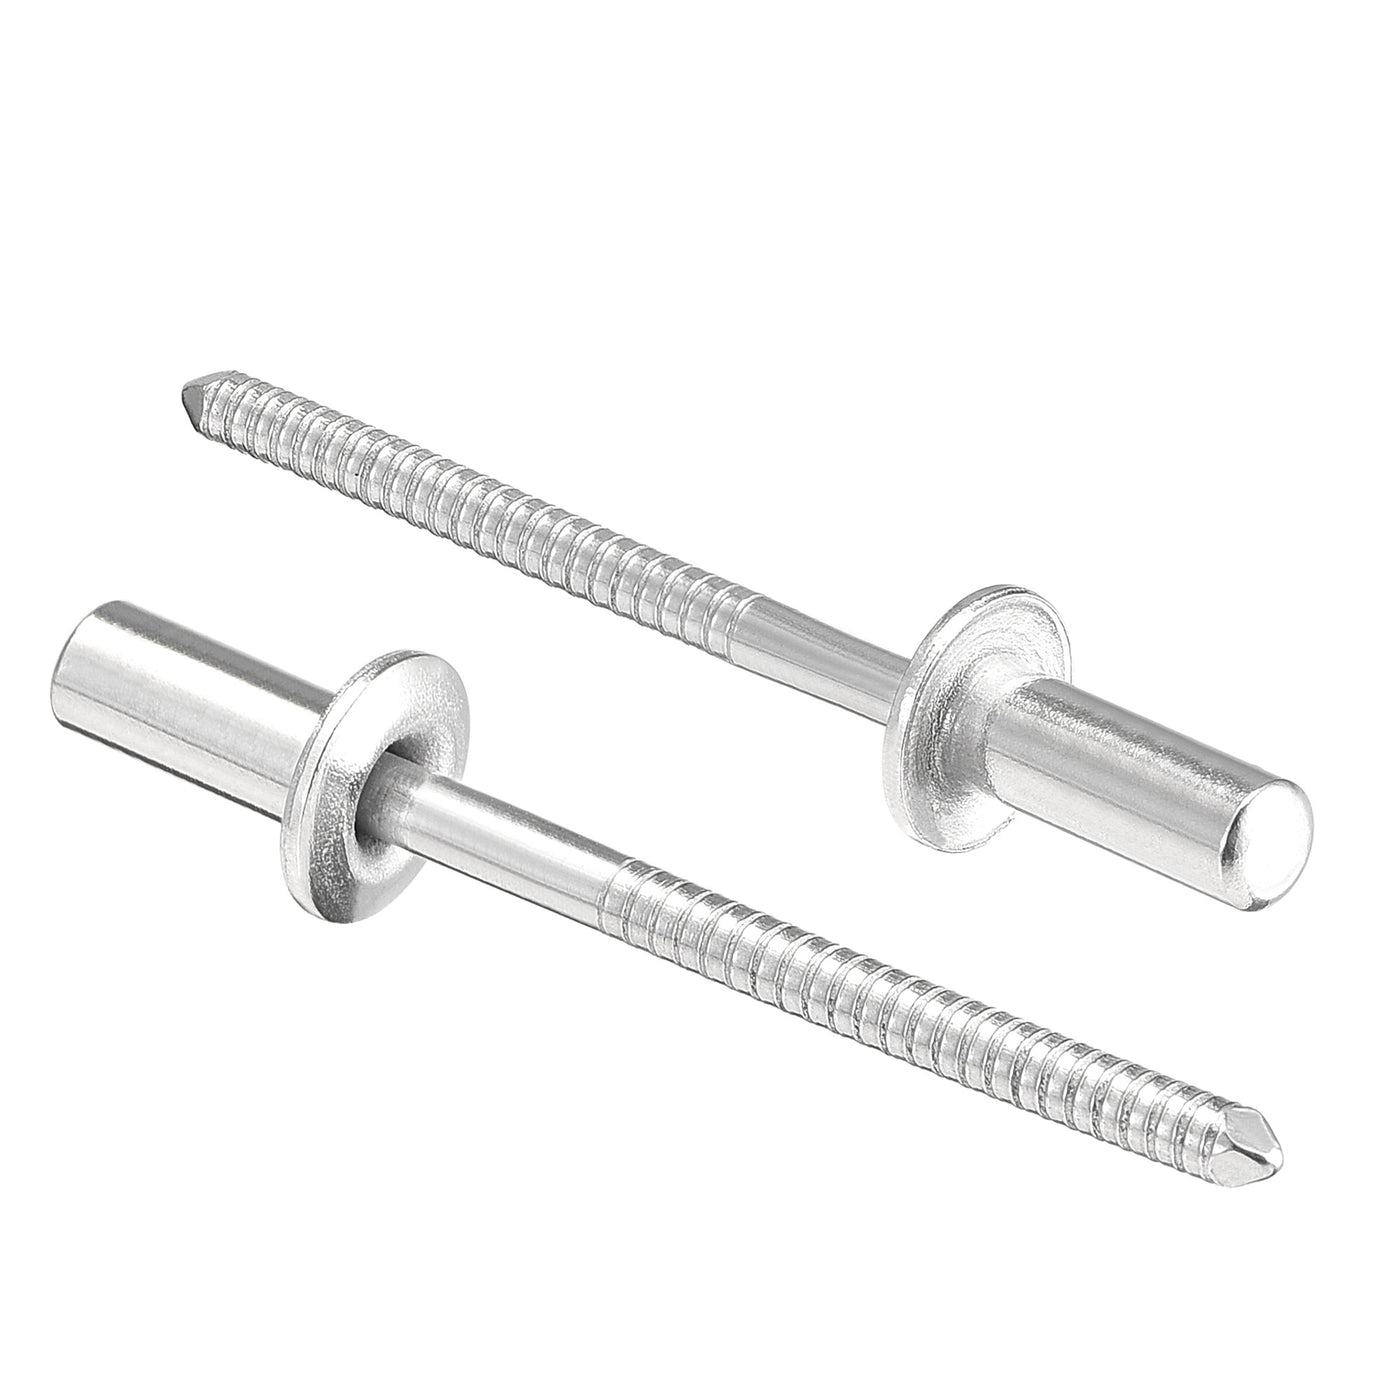 uxcell Uxcell Blind Rivets 304 Stainless Steel 4mm Diameter 11mm Grip Length 25pcs